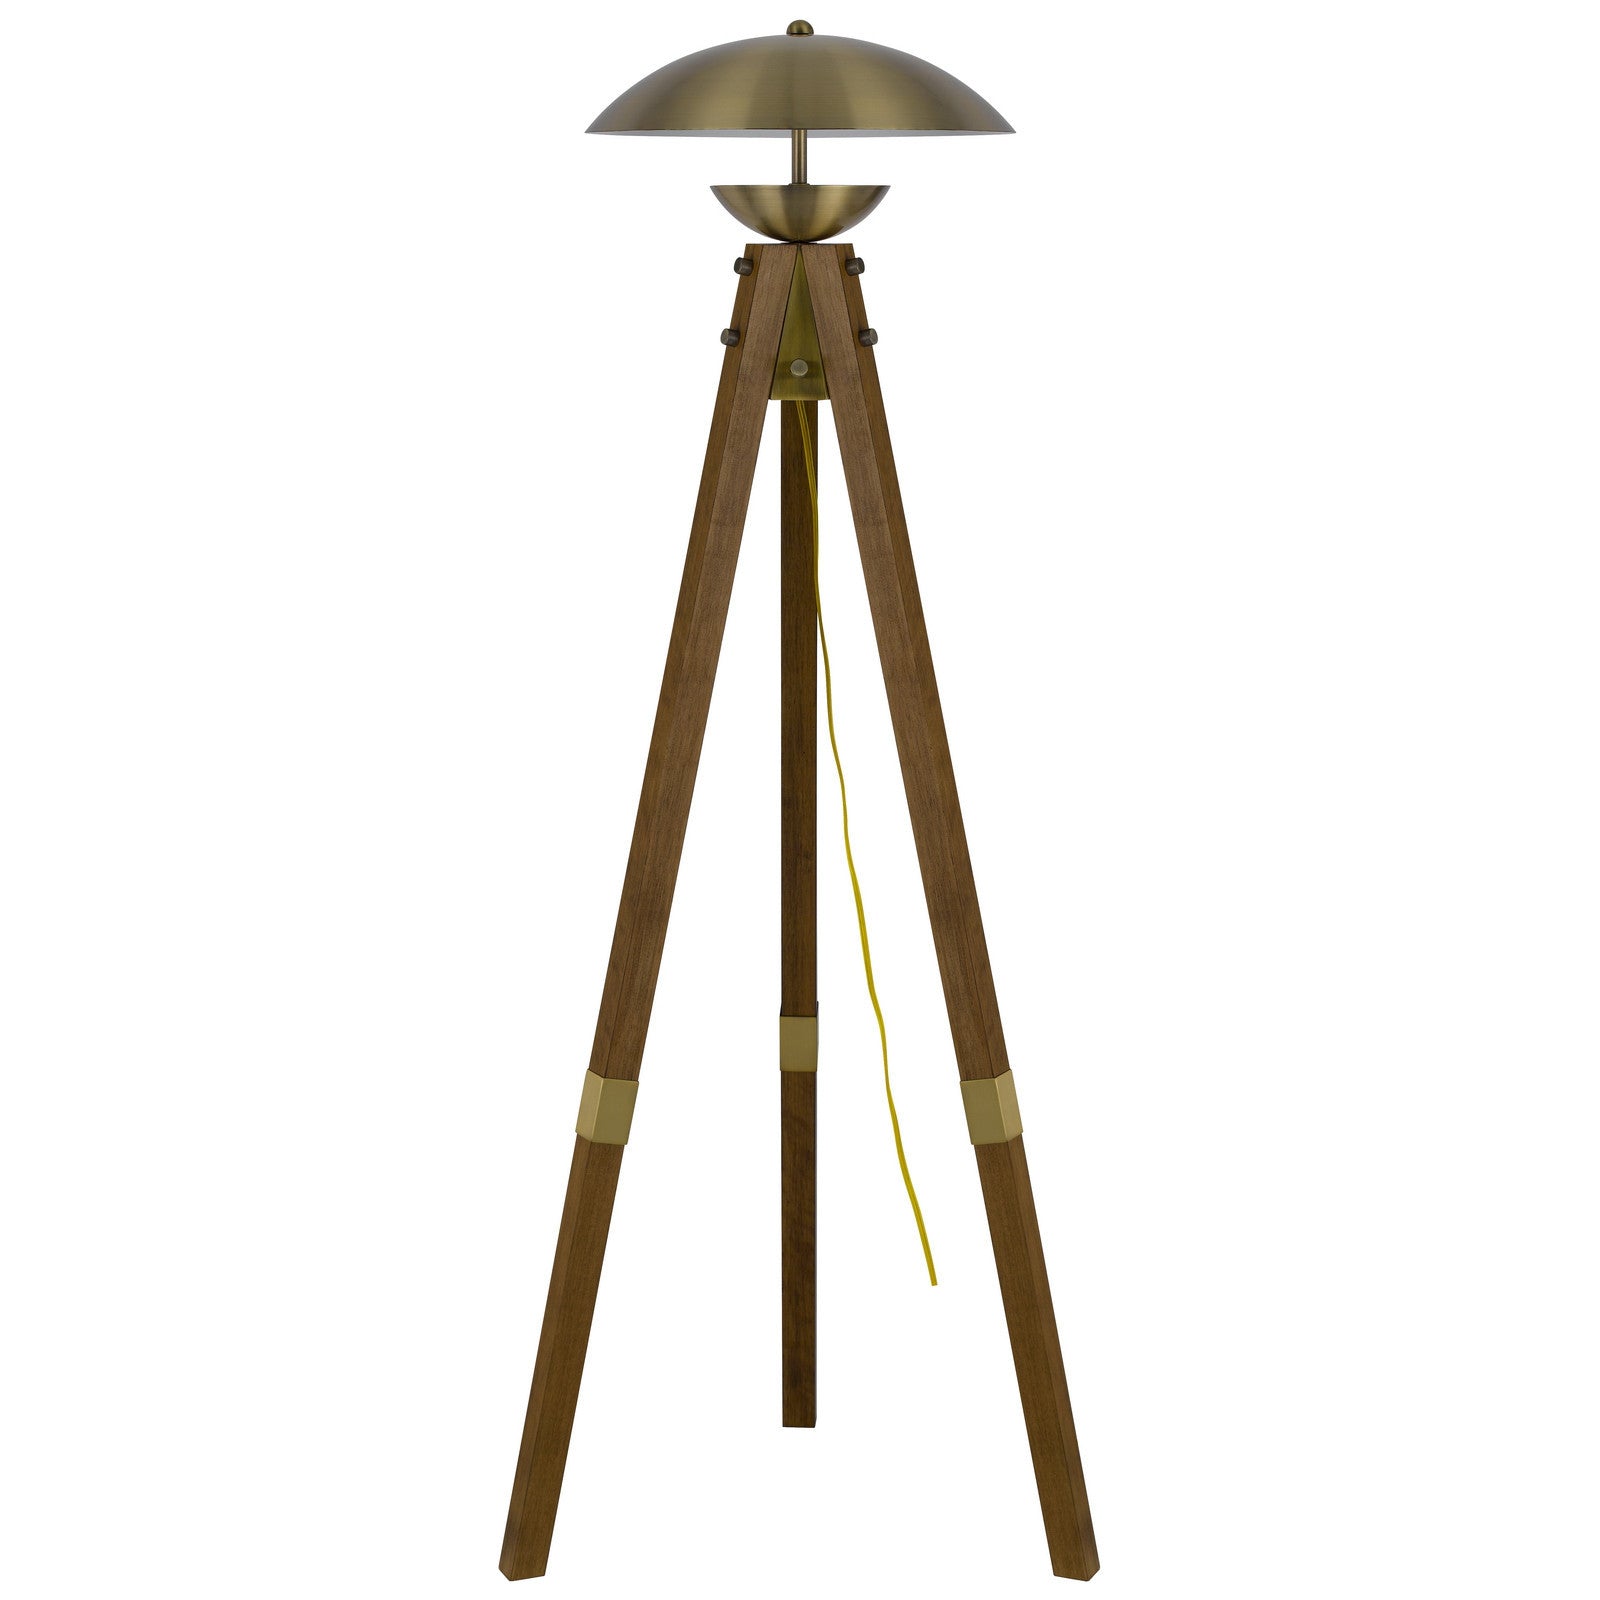 55" Brass Tripod Floor Lamp With Antiqued Brass Dome Shade